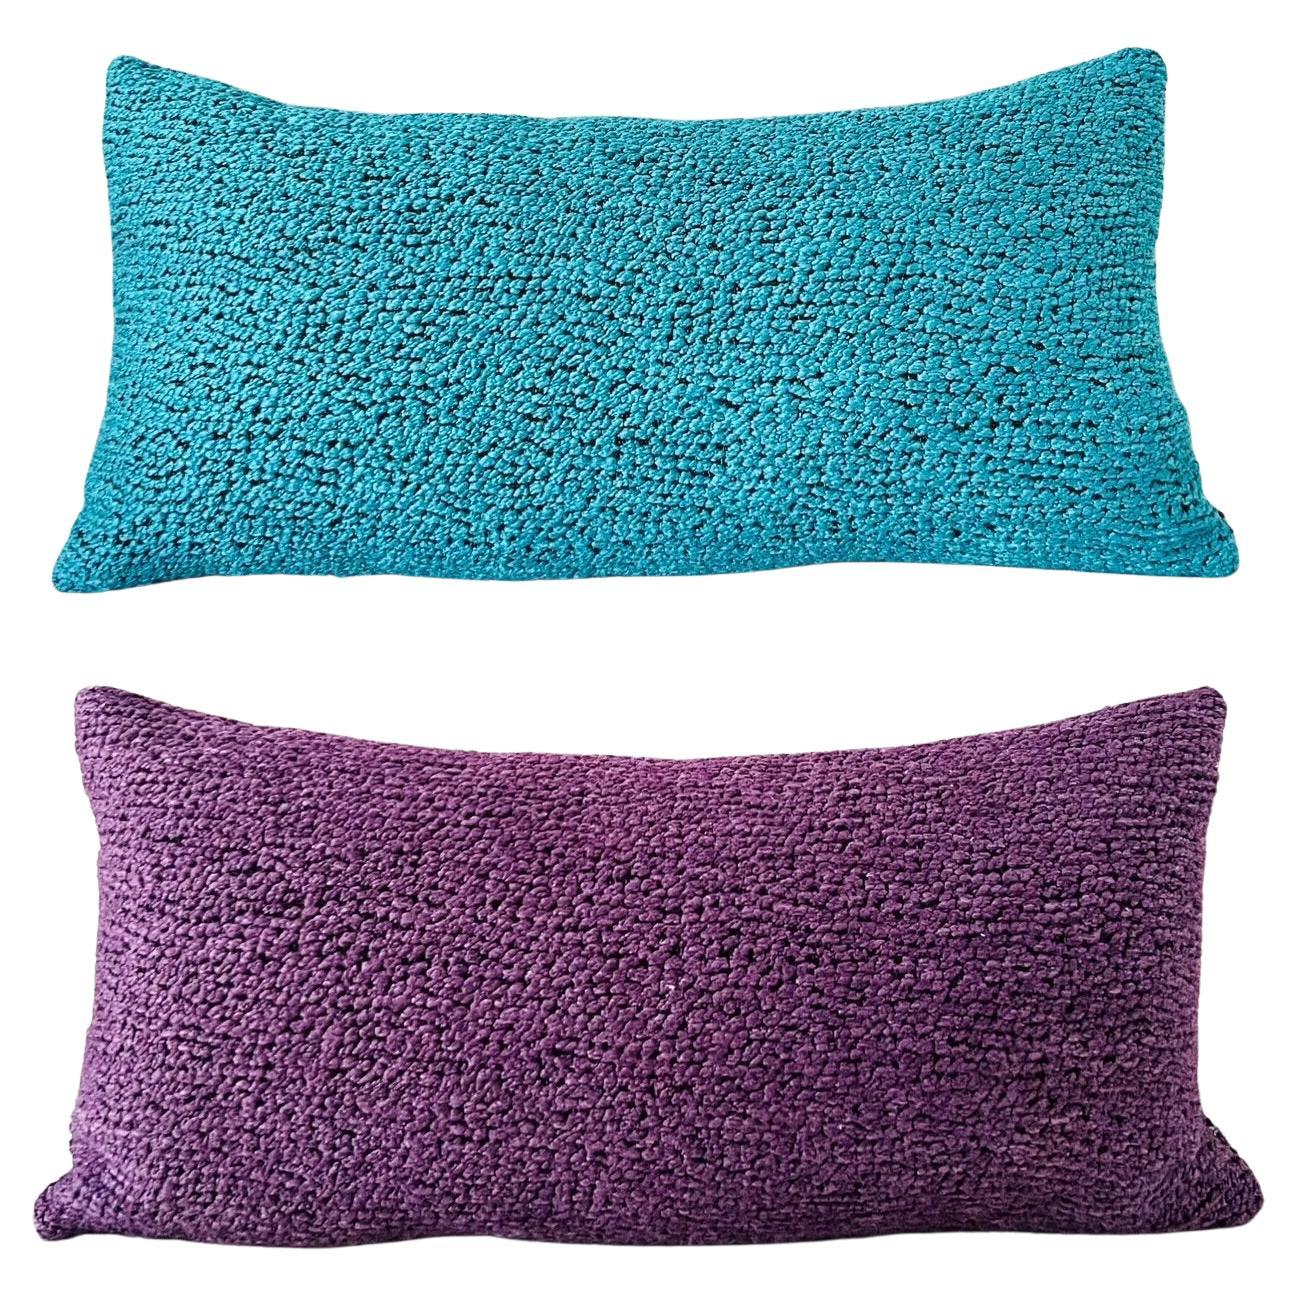 Pierre Frey Woven Textured and Boucle Lumbar Pillows in Purple and Aqua